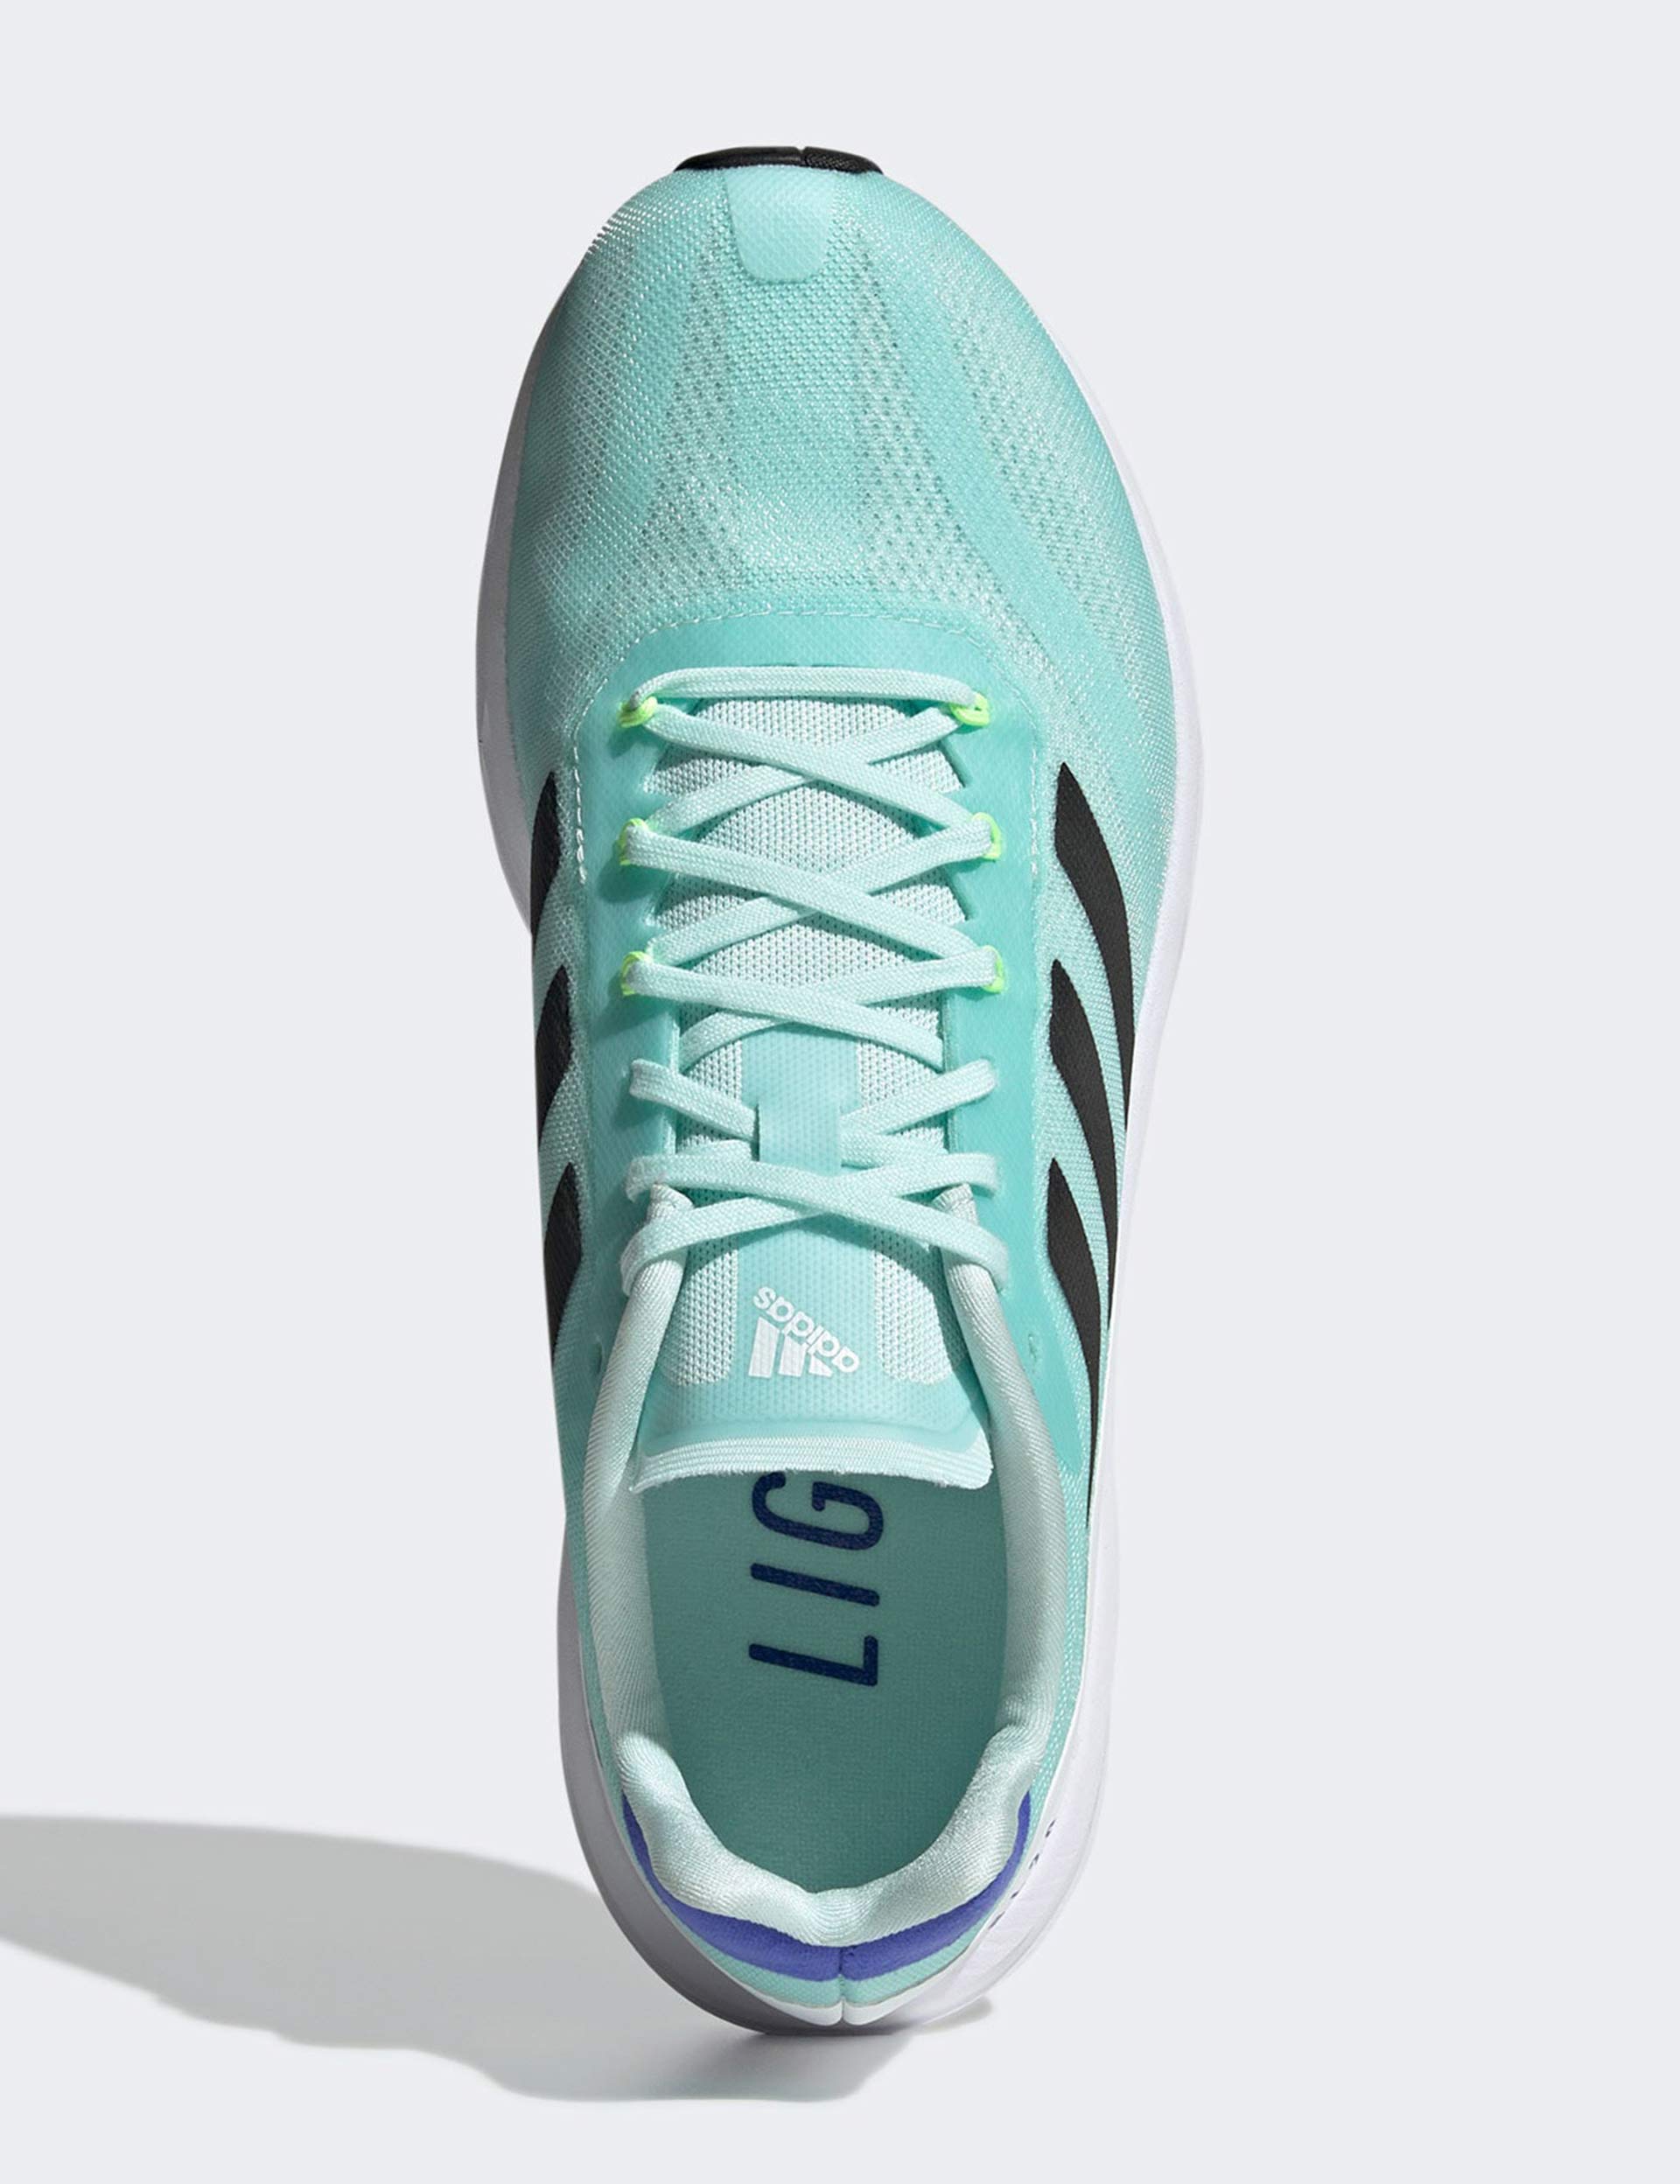 adidas  Shoes - Halo Mint/Black/Signal Green | The Sports Edit